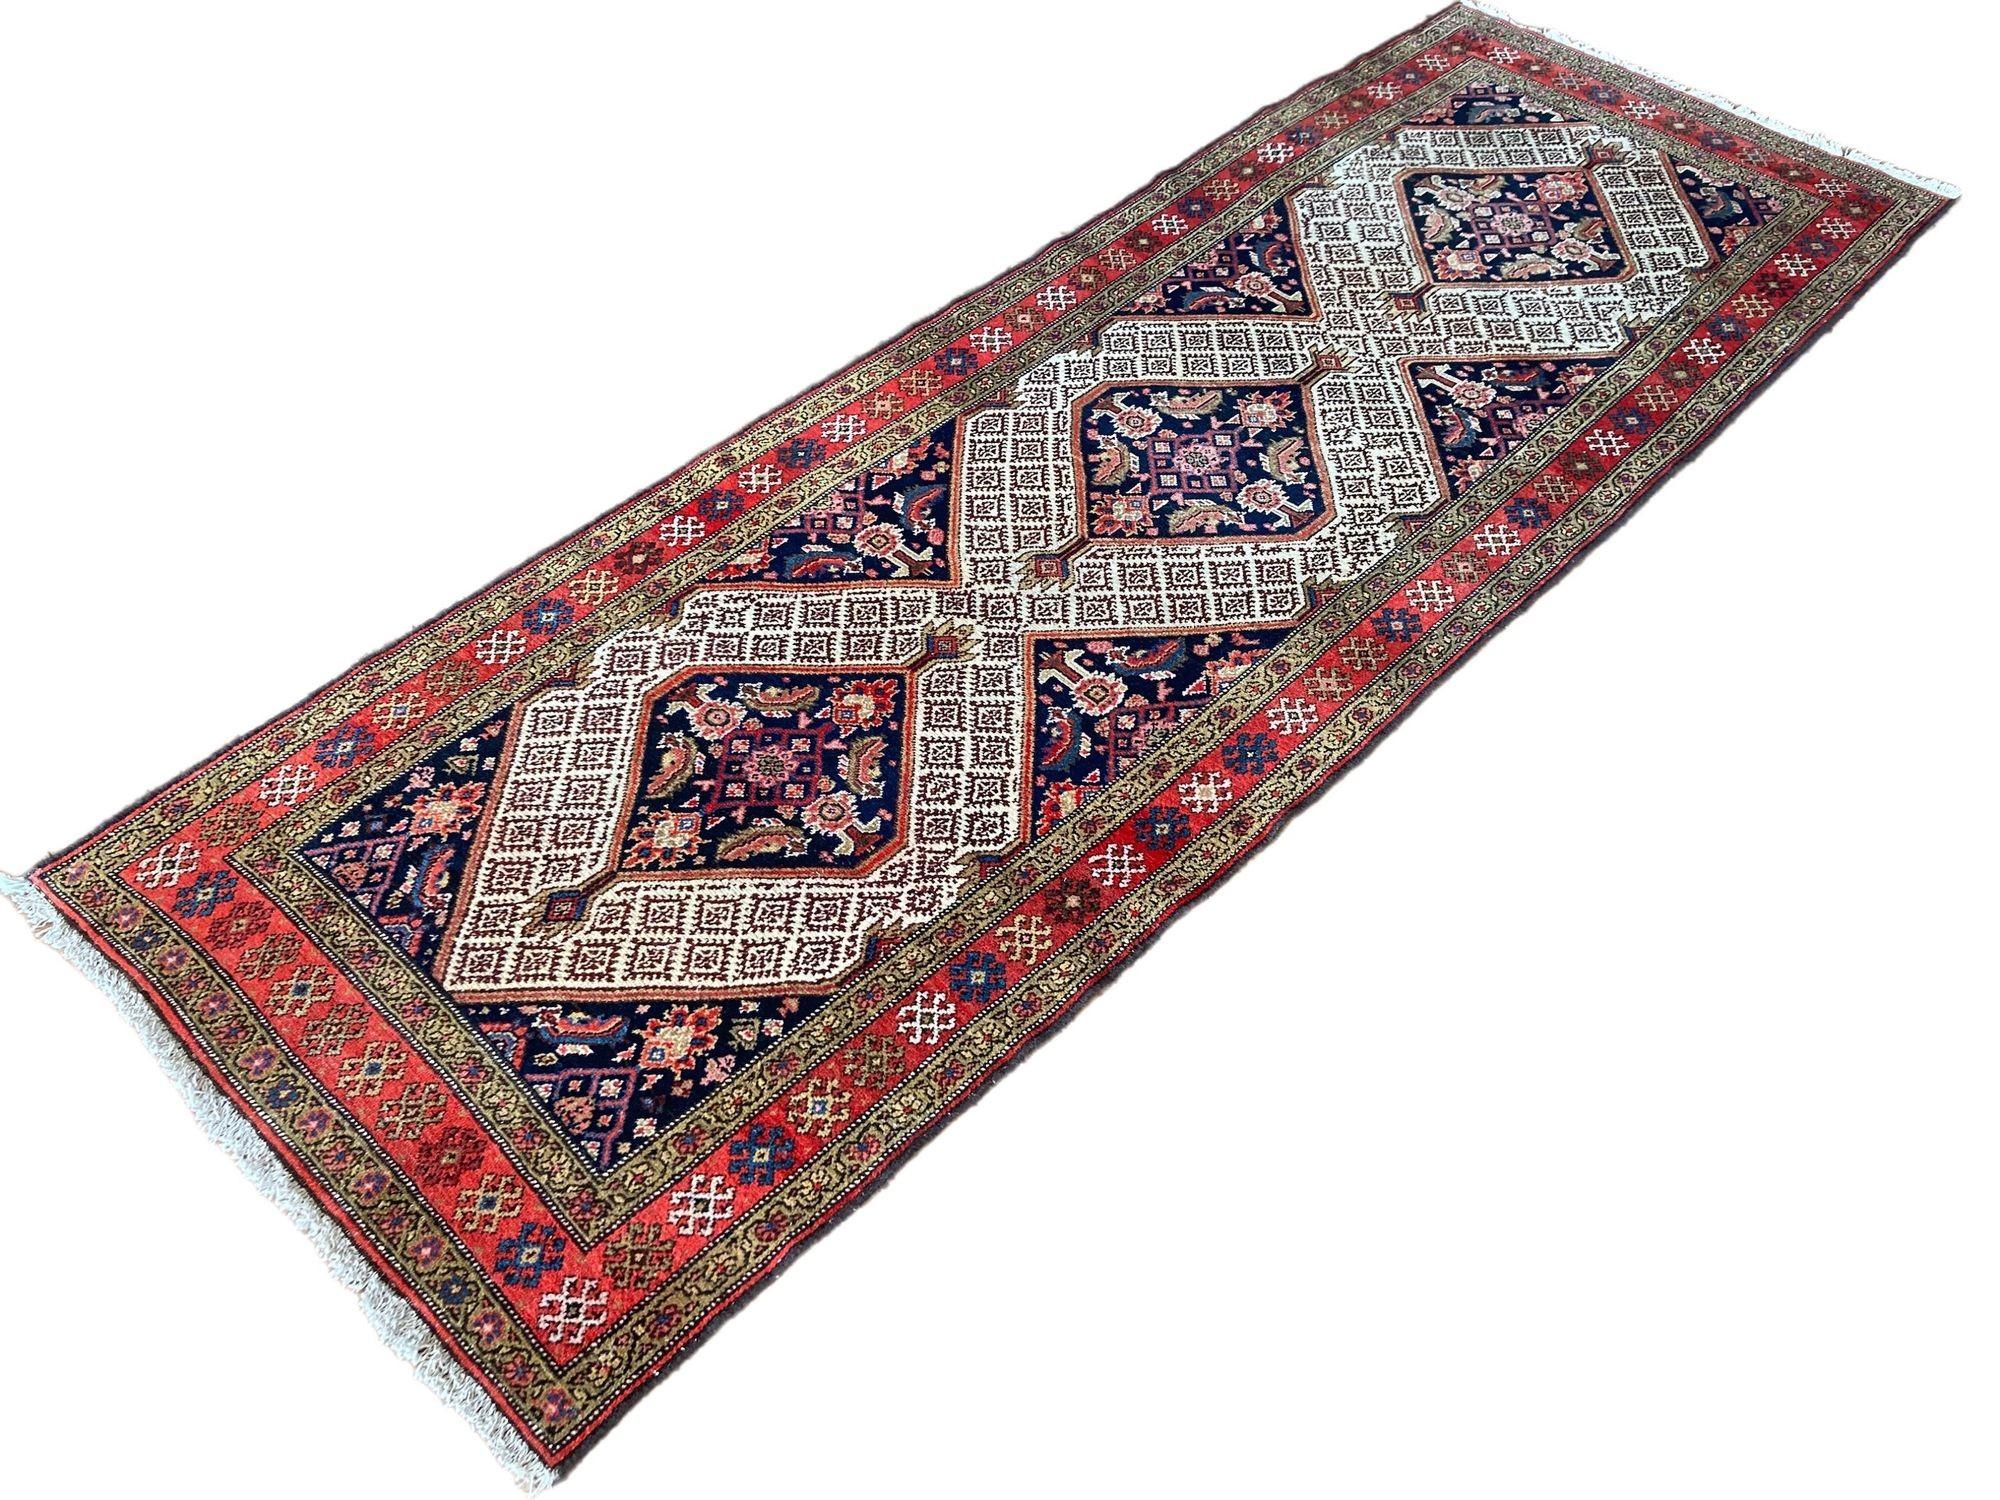 Antique Sarab Runner 3.18m X 1.10m In Good Condition For Sale In St. Albans, GB